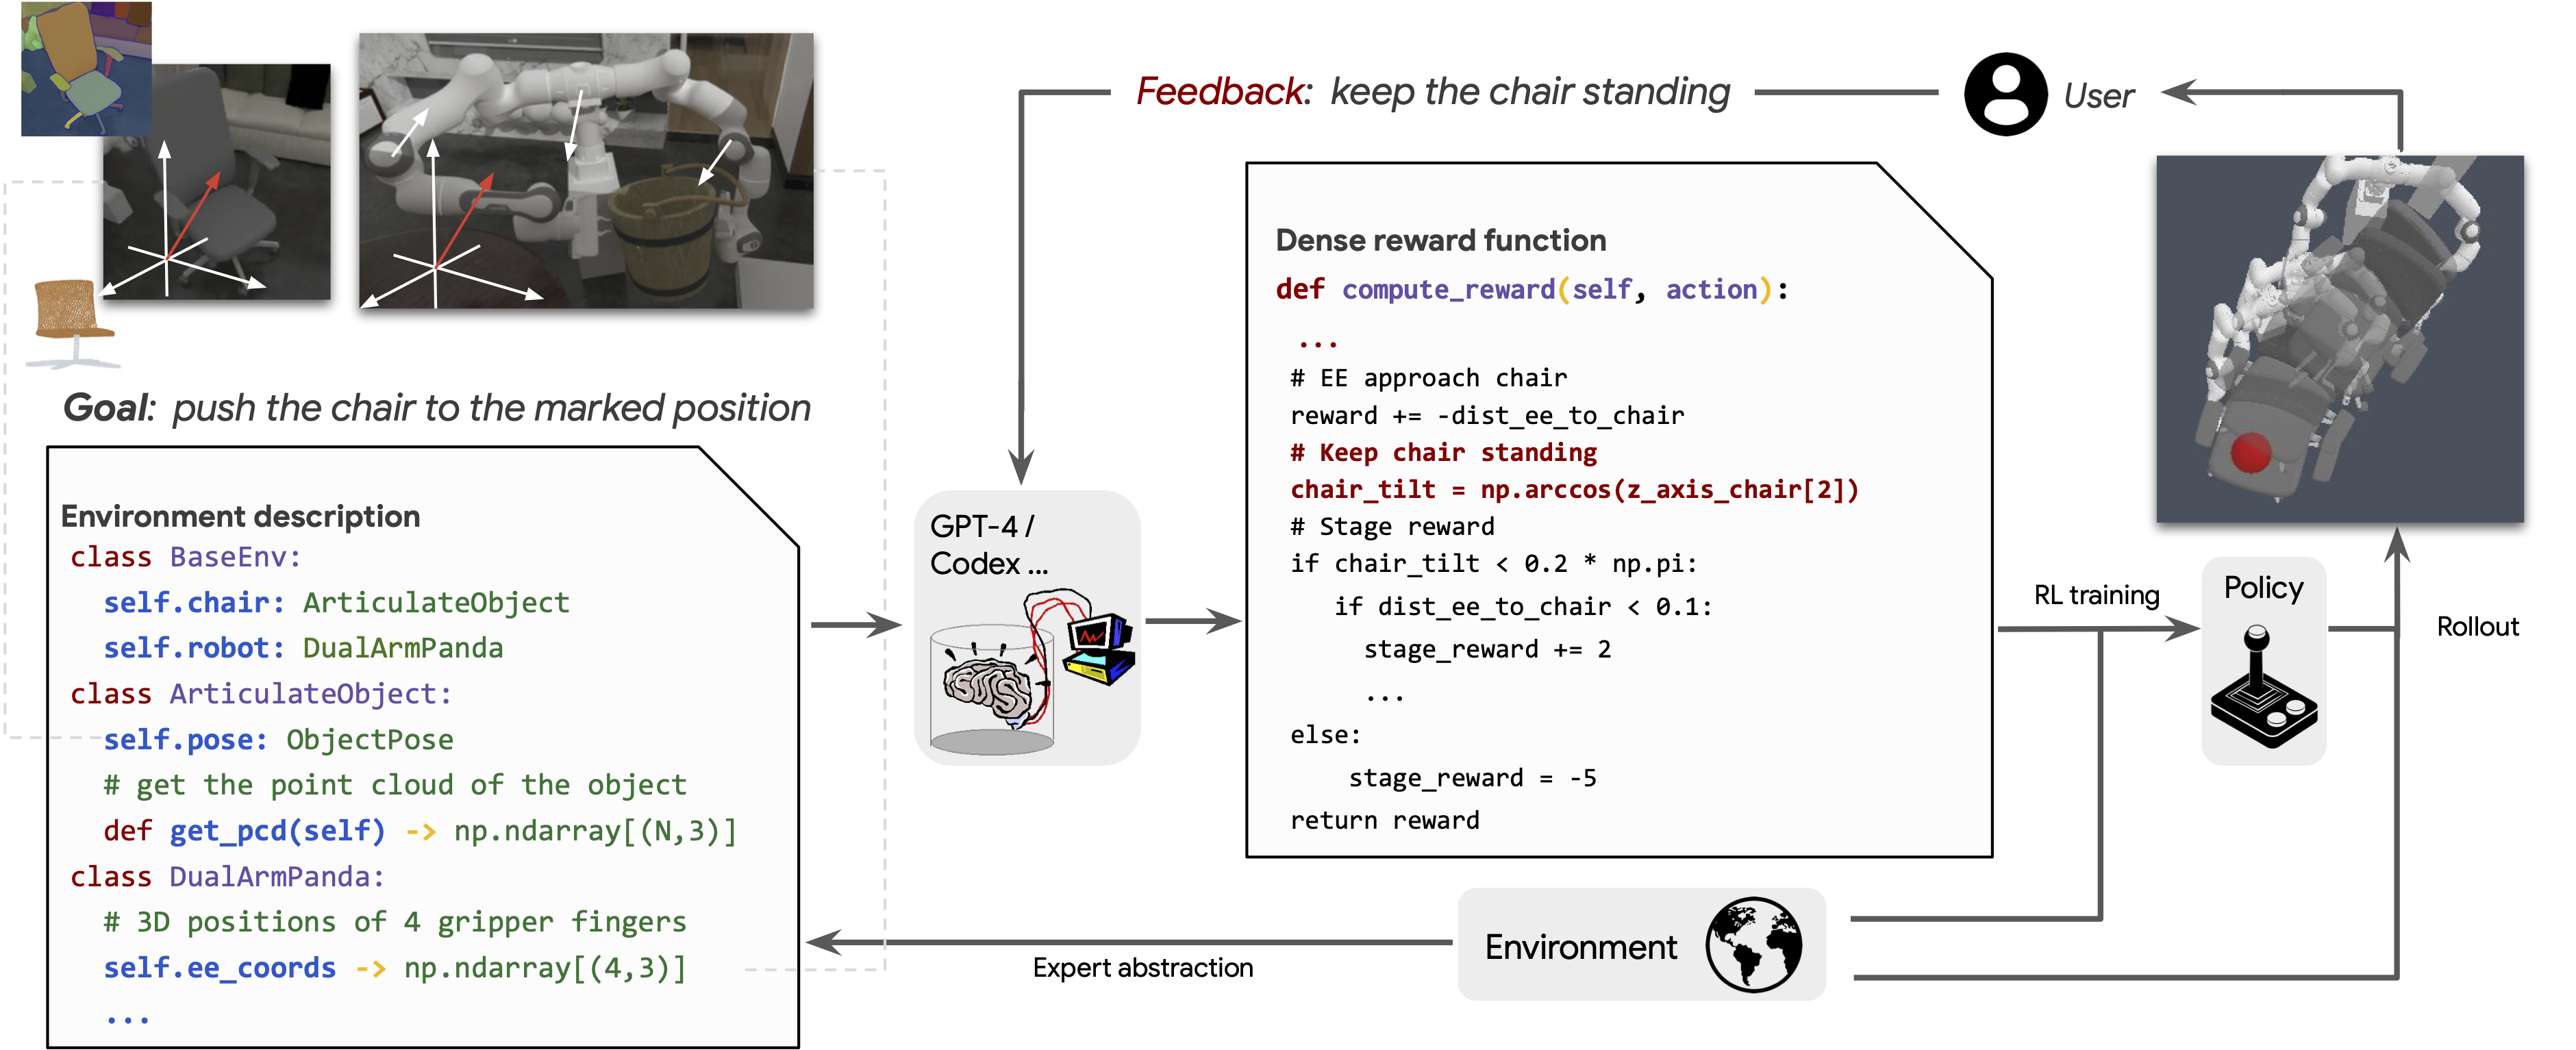 Text2Reward: Automated Dense Reward Function Generation for Reinforcement Learning
